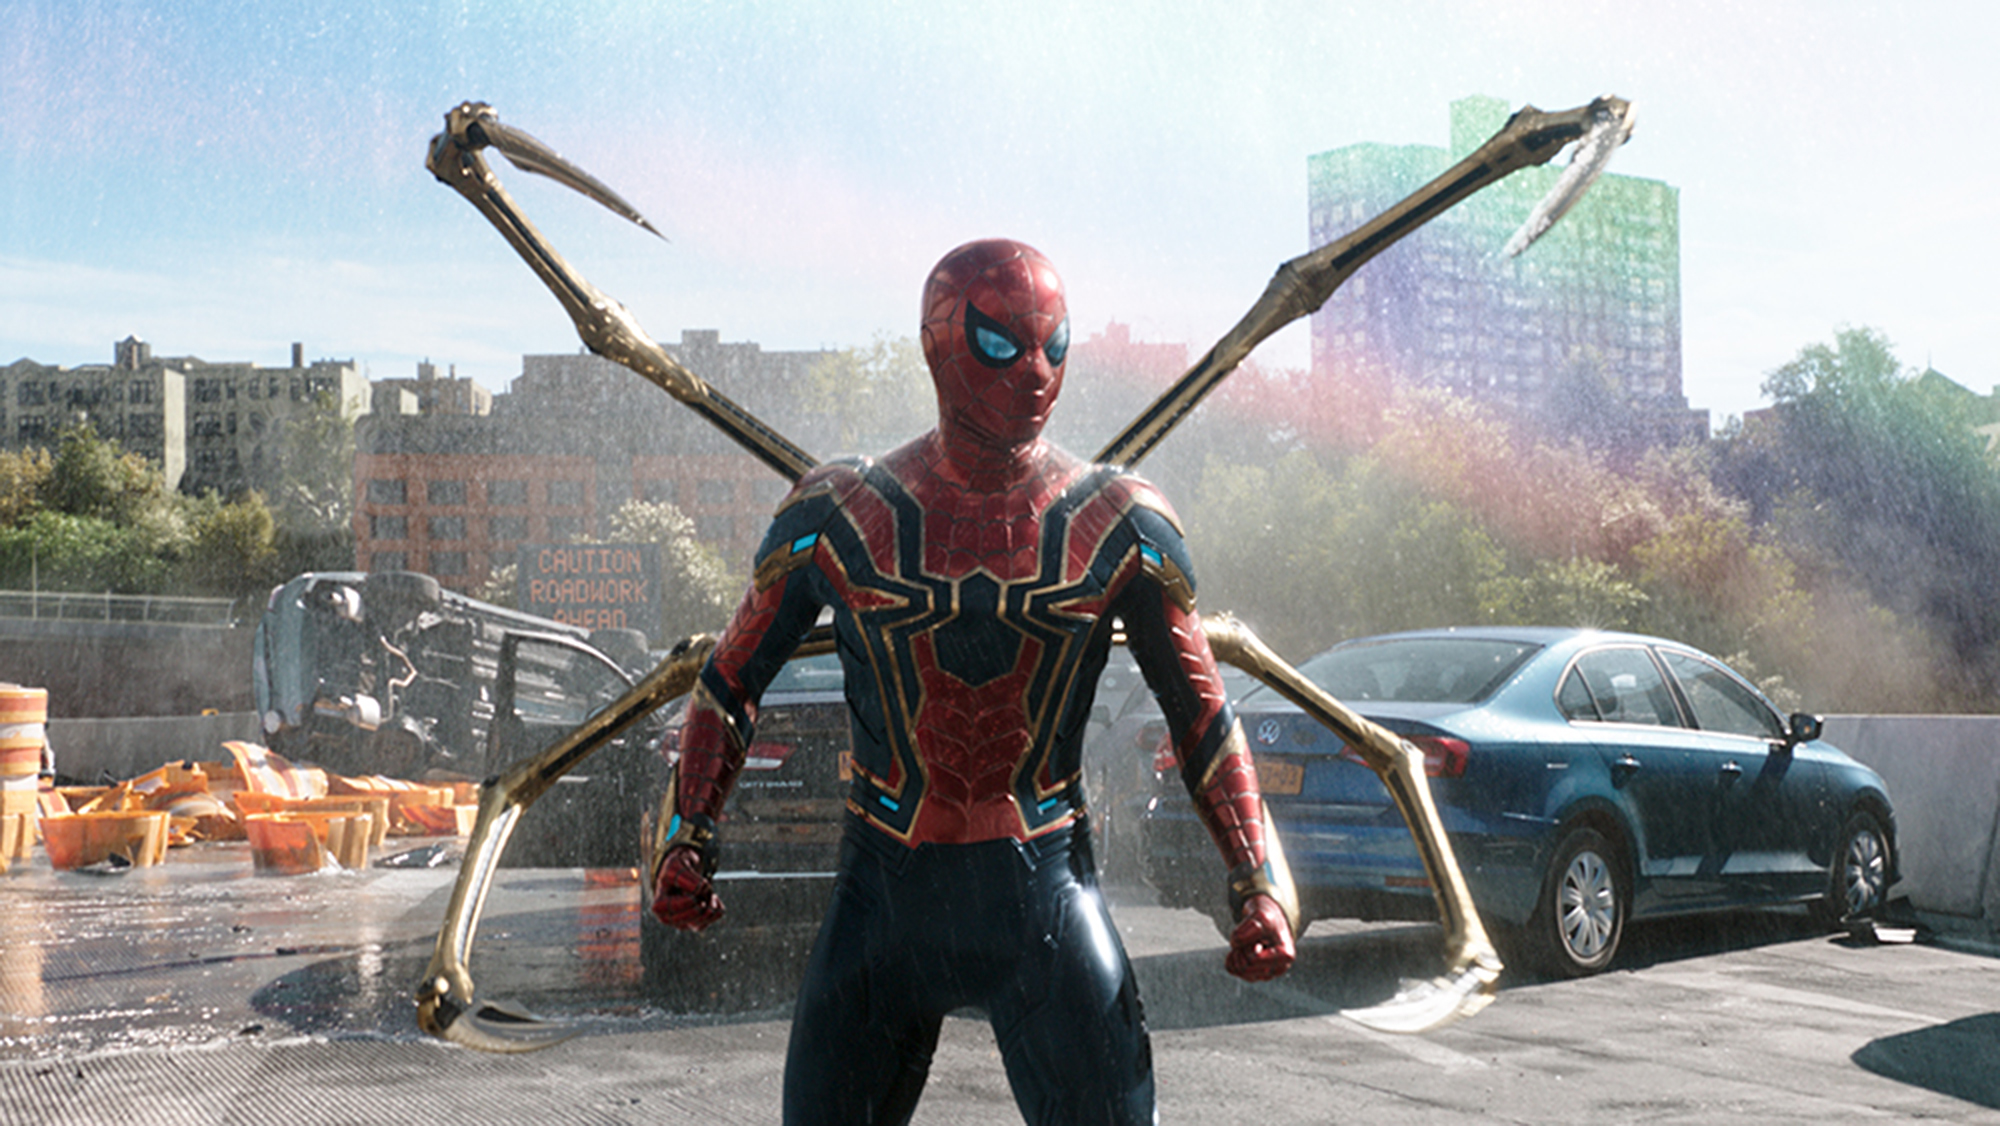 Spider-Man: No Way Home' China Release Date in Doubt – The